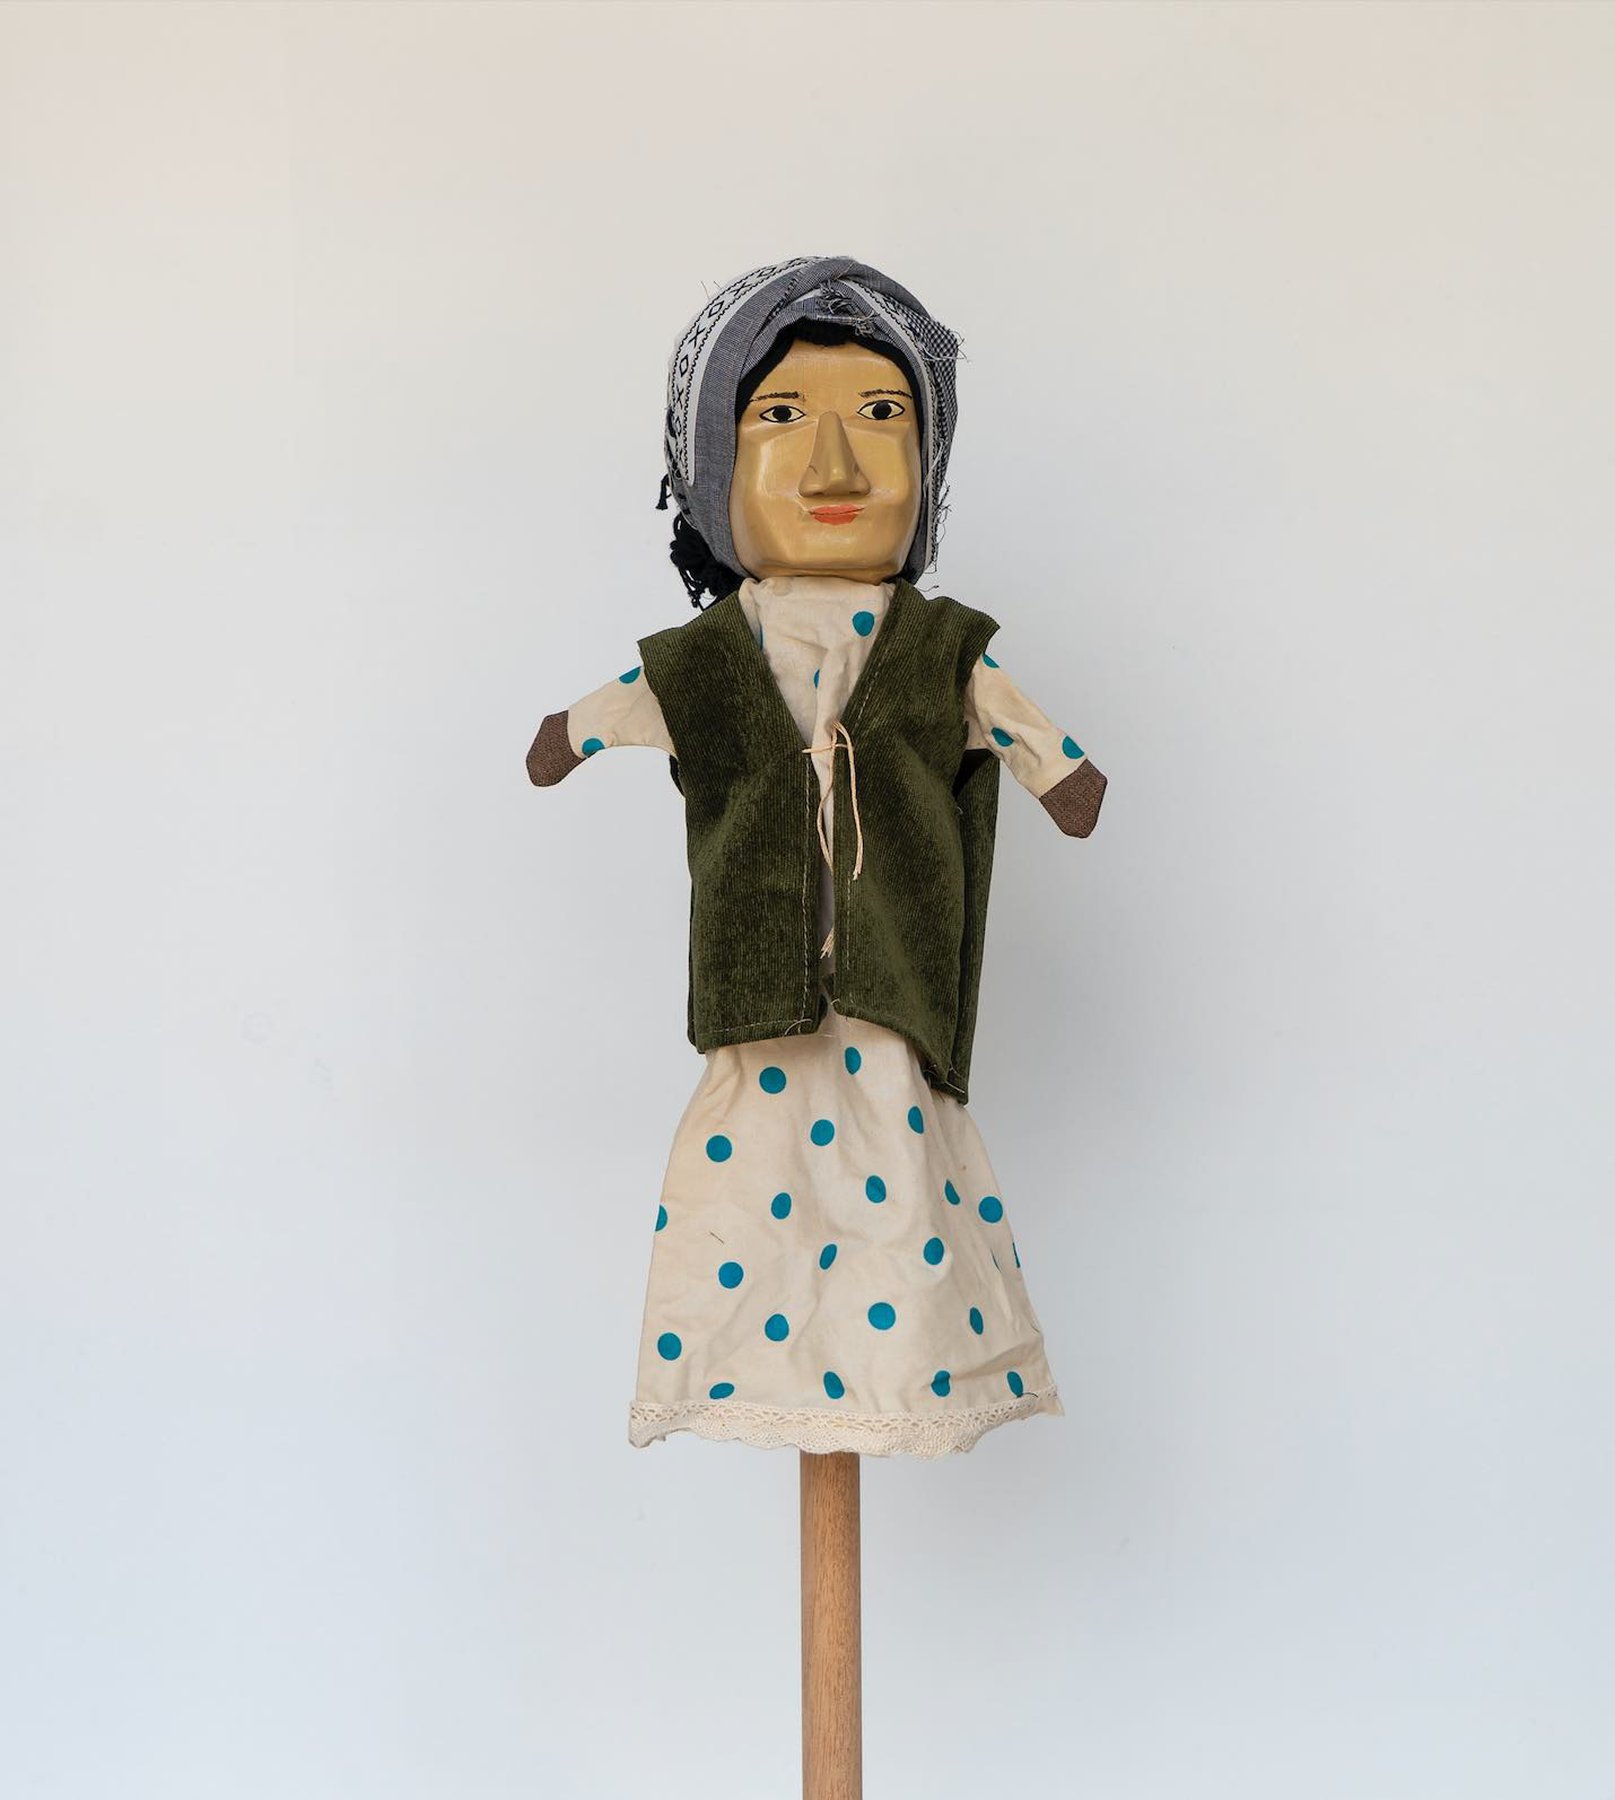 Daniela Ortiz, The Brightness of Greedy Europe, 2022, wood hand-carved, sewn, knitted and embroidered costumes (25 cm) puppet - Houria Bouteldja